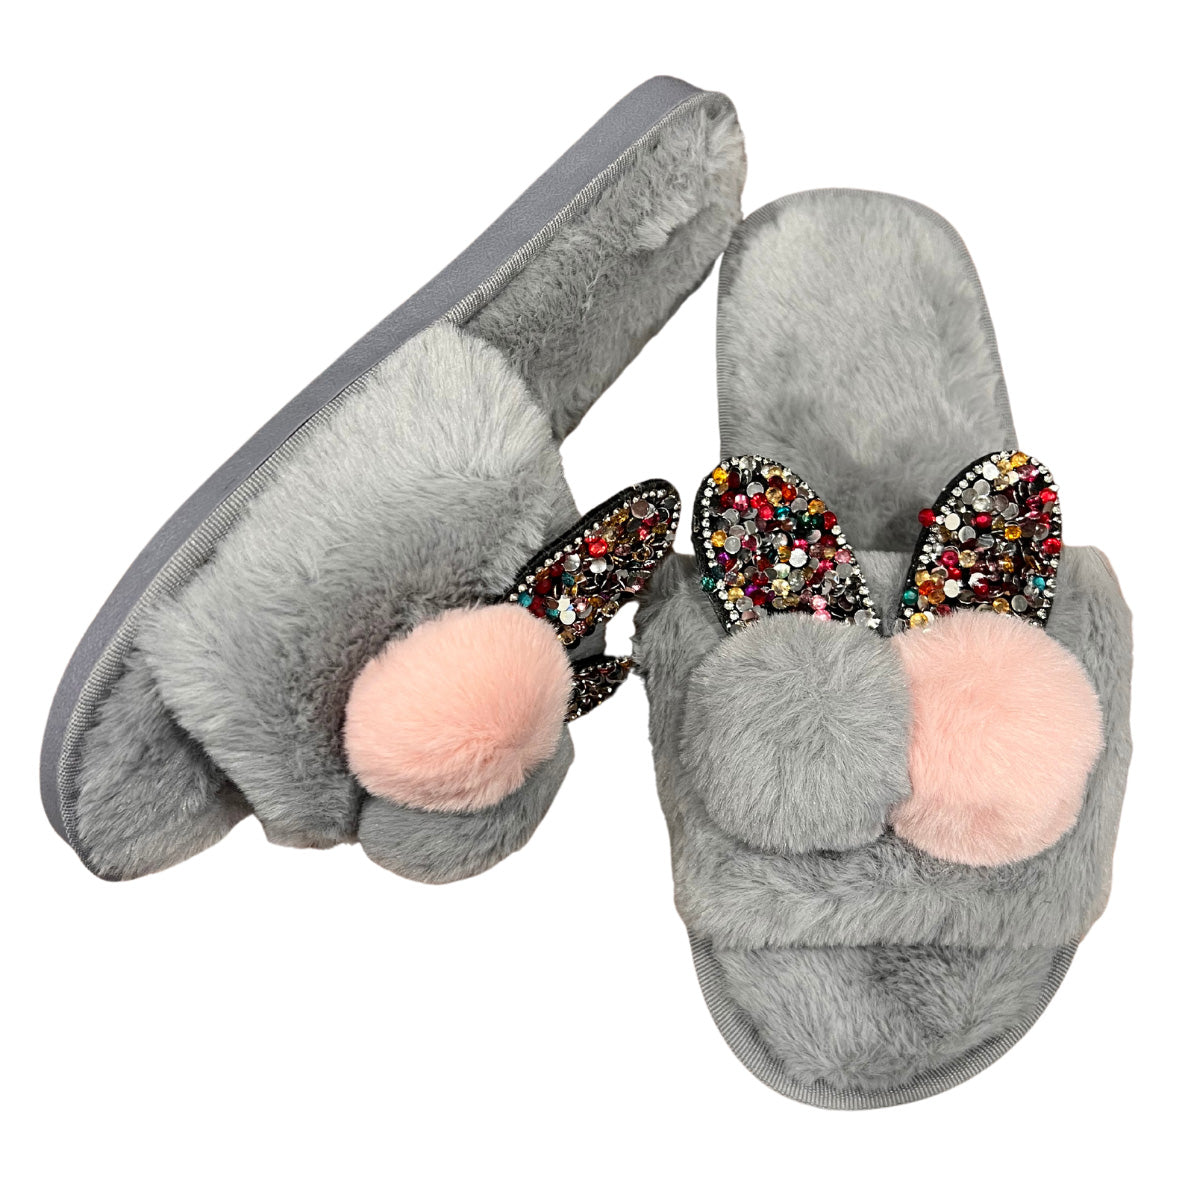 Super Soft Slipper / Sliders with sparkle jewel ears